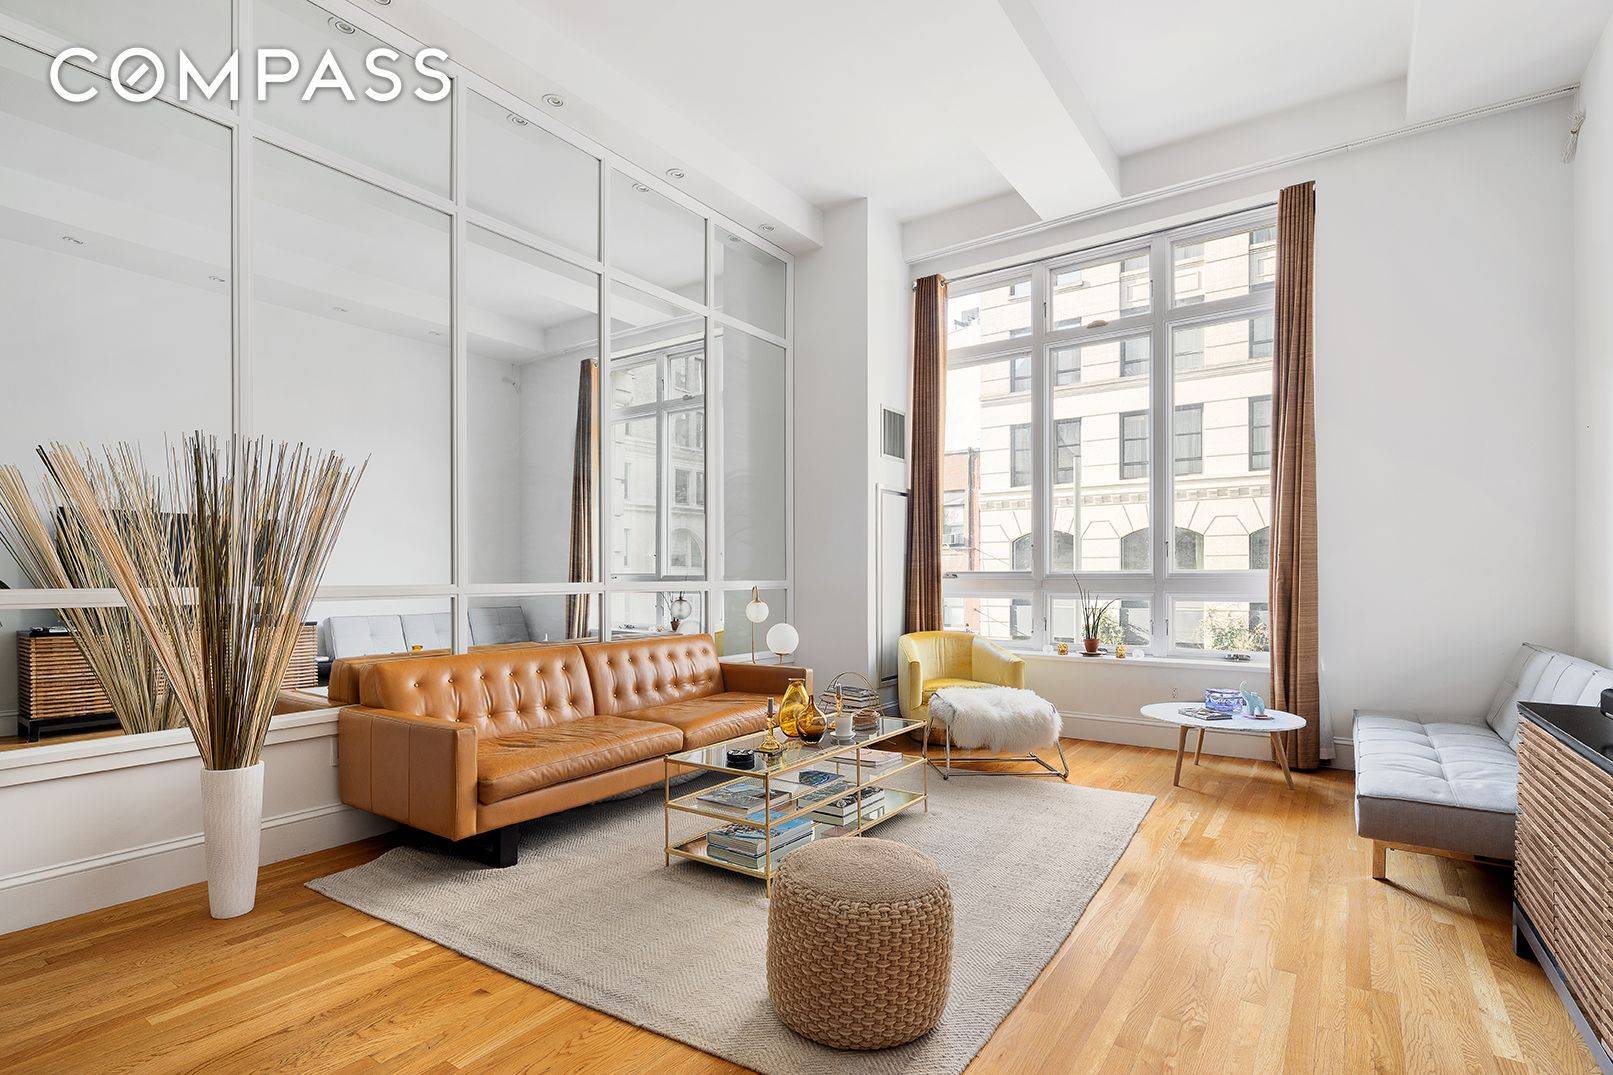 At over 1, 200 square feet, this one bedroom home office loft features soaring 13 foot ceilings, enormous triple paned windows and a suite of high end appliances, all within ...